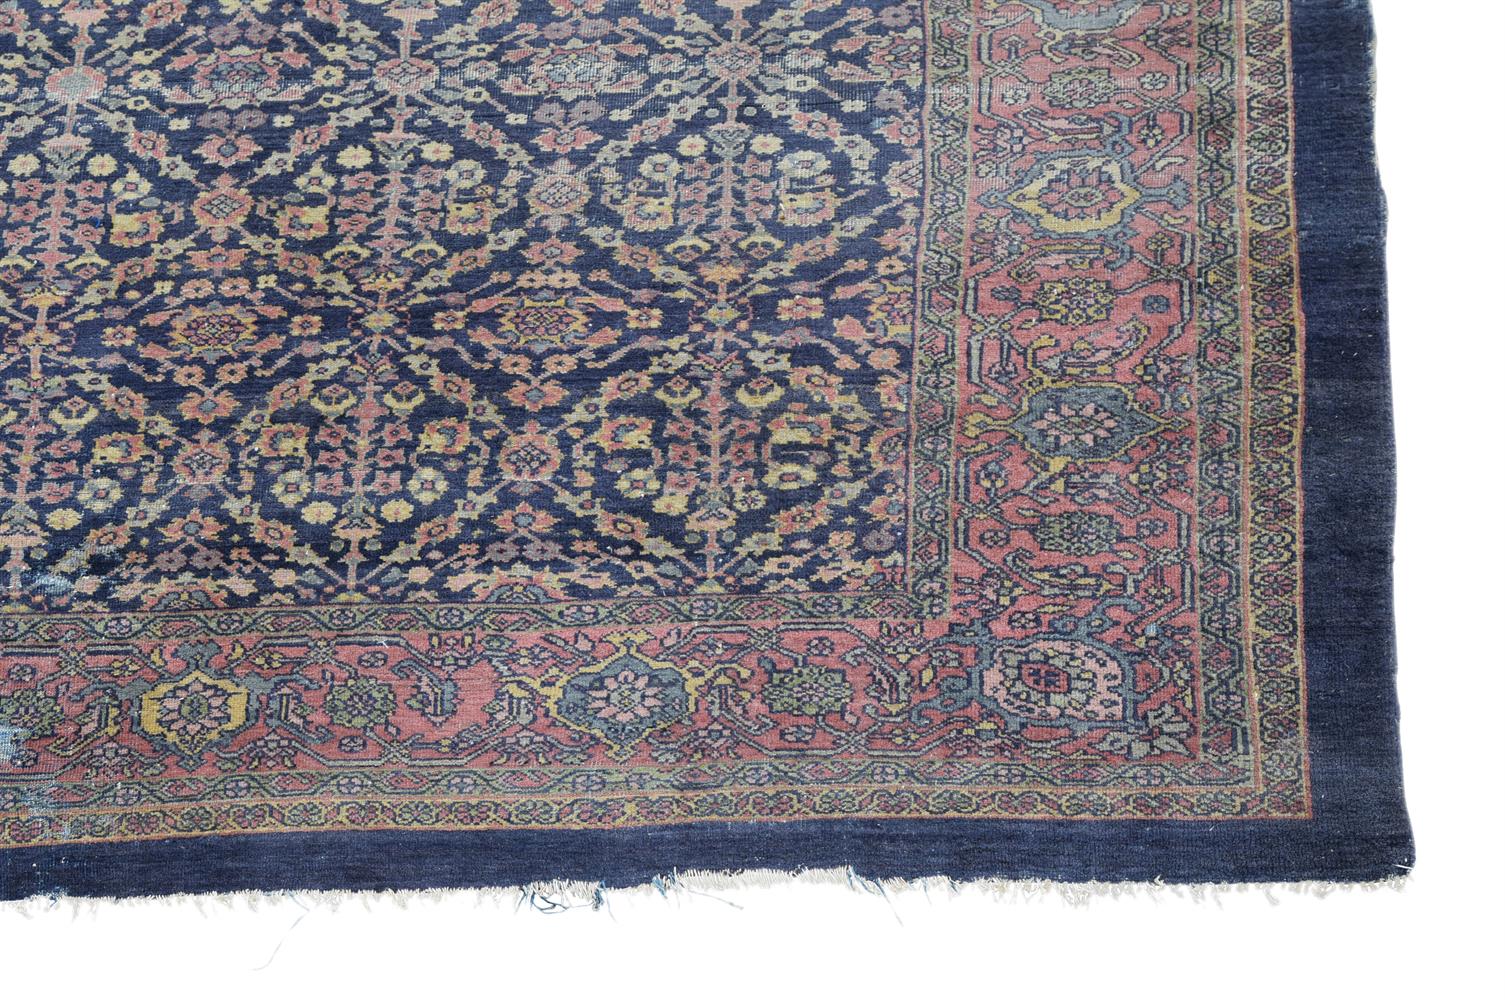 A FEREGHAN CARPET WEST PERSIA CIRCA 1900 - Image 2 of 3